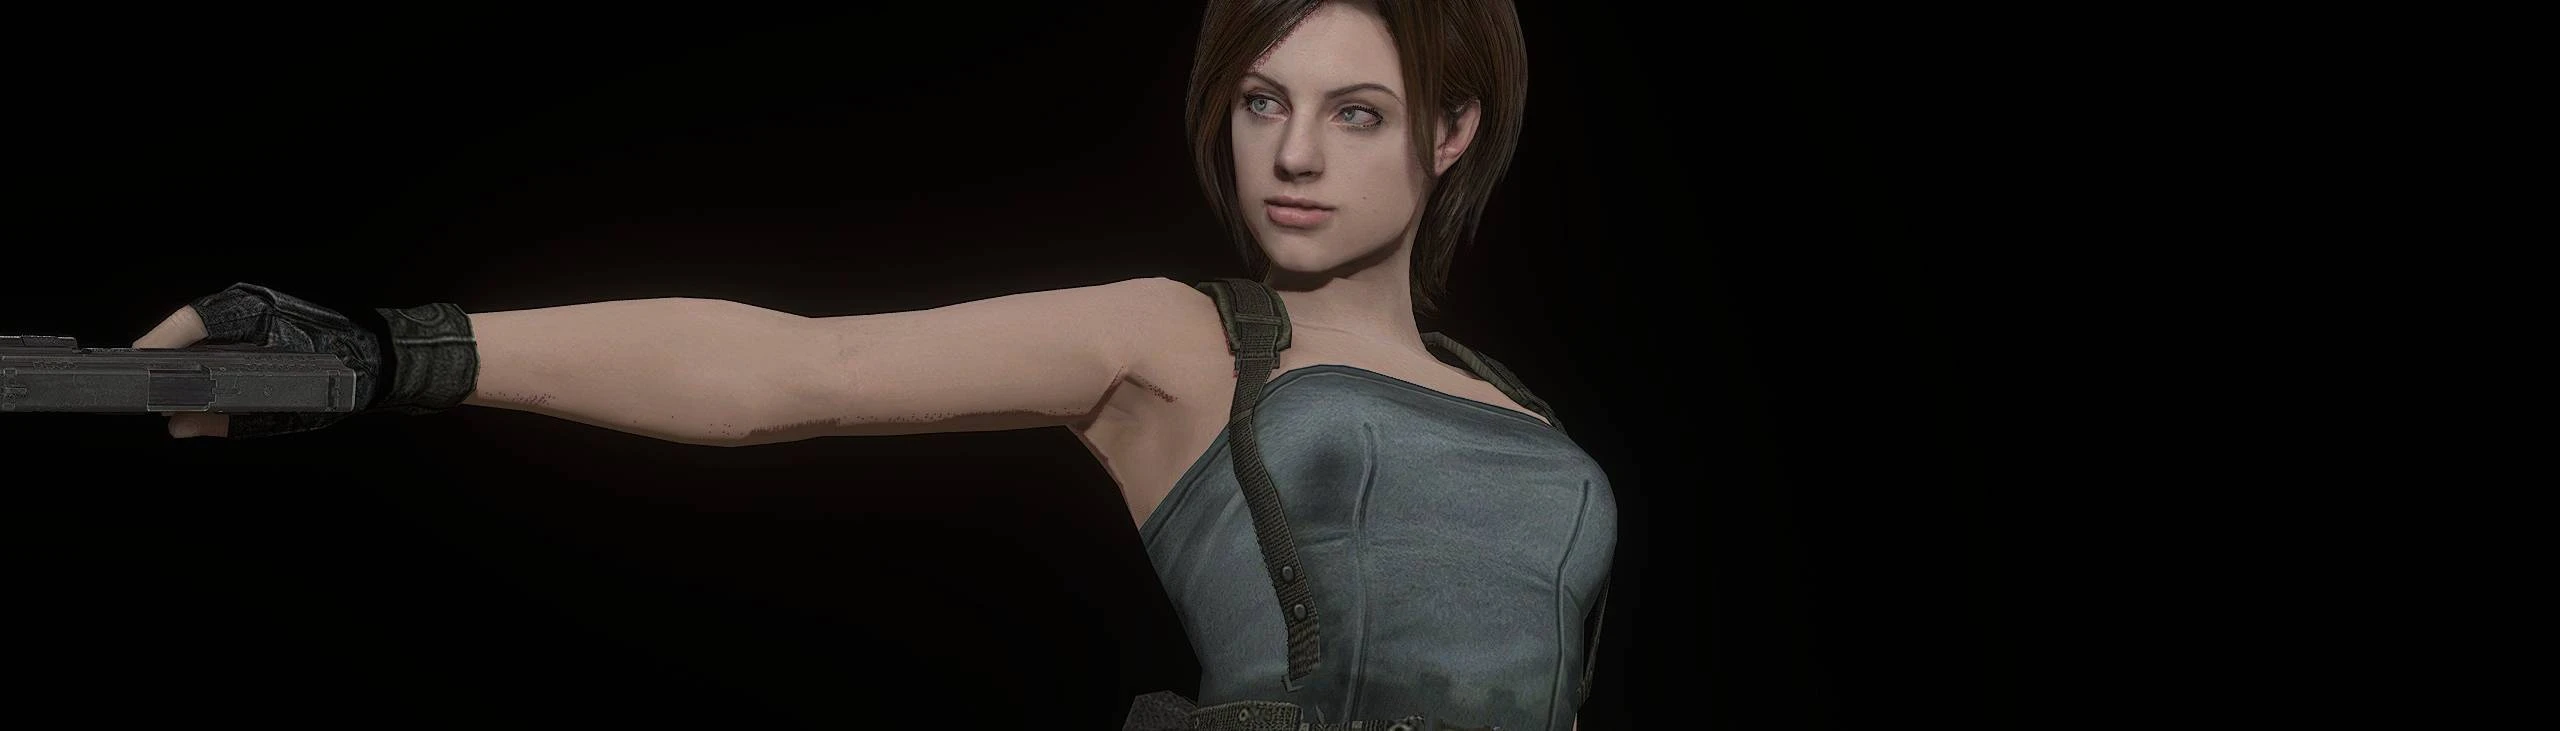 What Are The Chances of Getting An Ashley Skin For Ada/Jill? : r